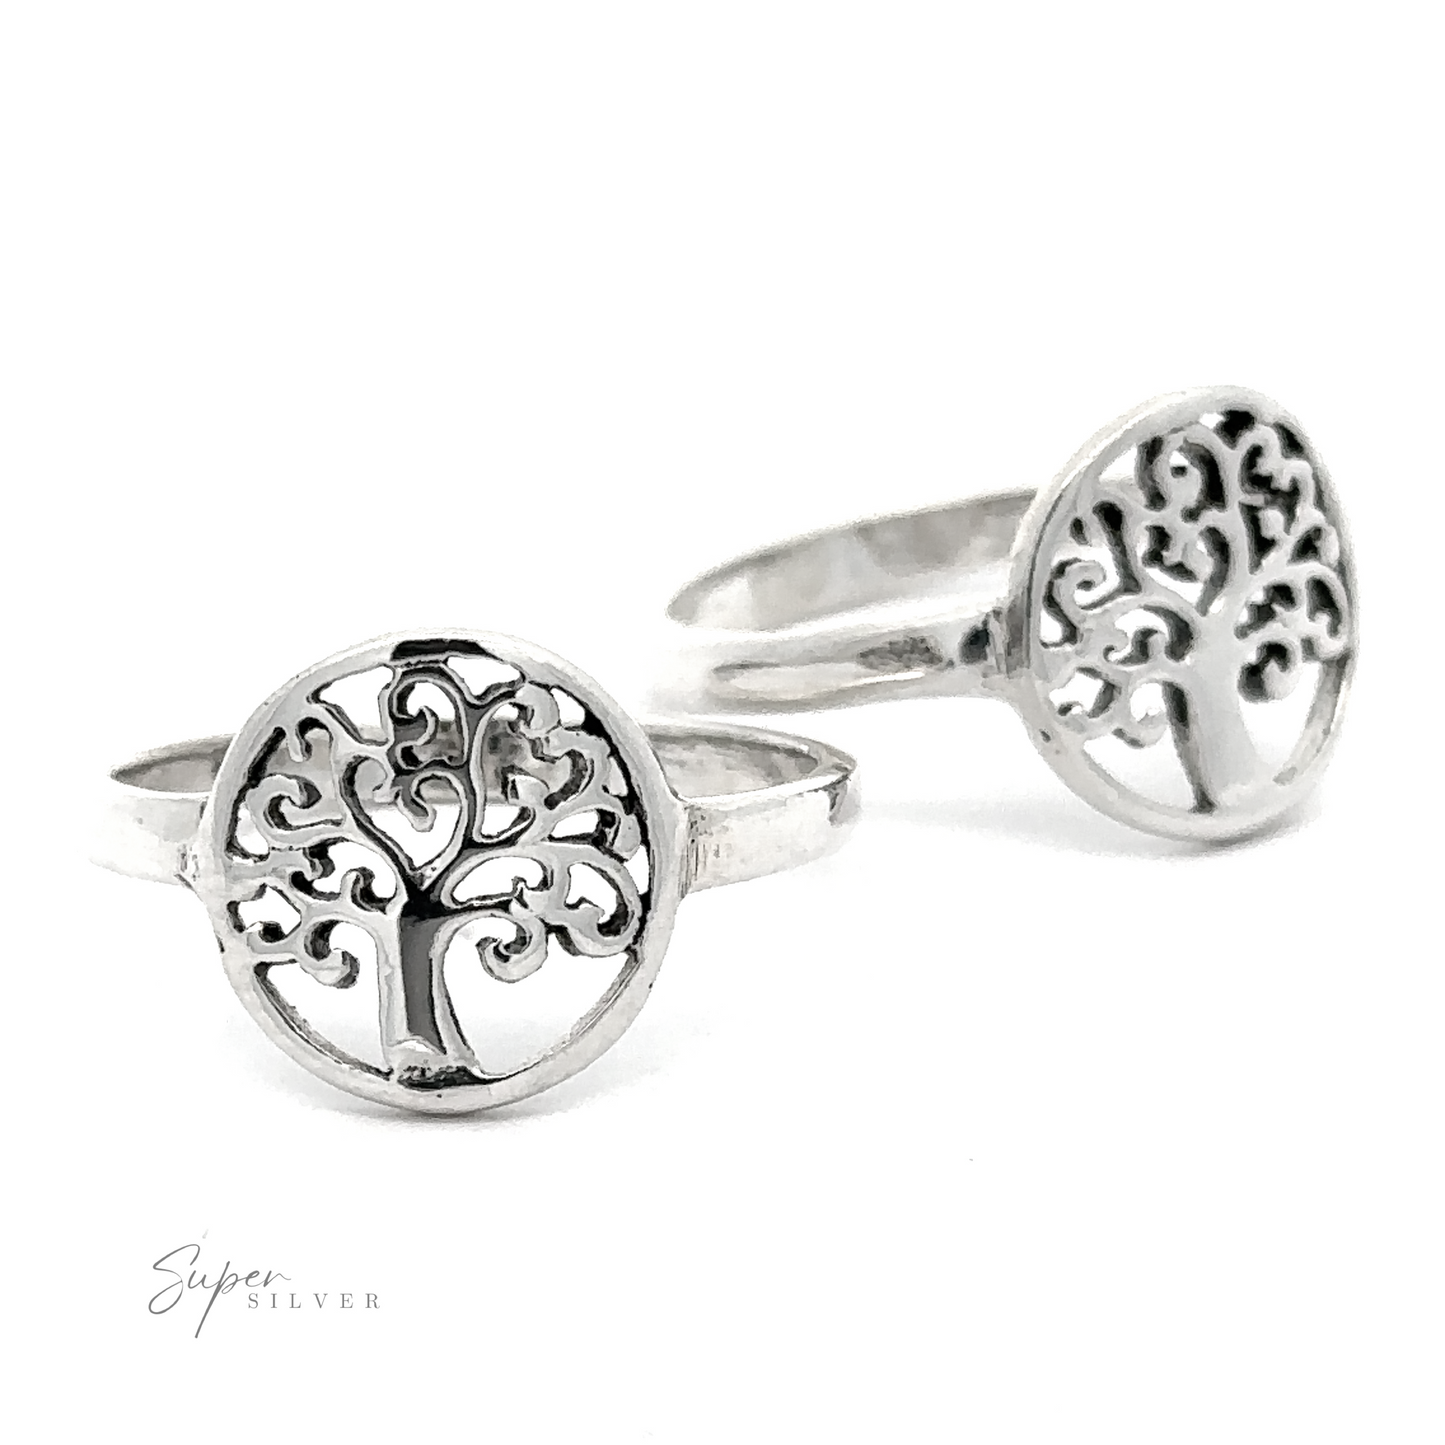 Two sterling silver Tree Of Life Ring With Swirling Branch Design.